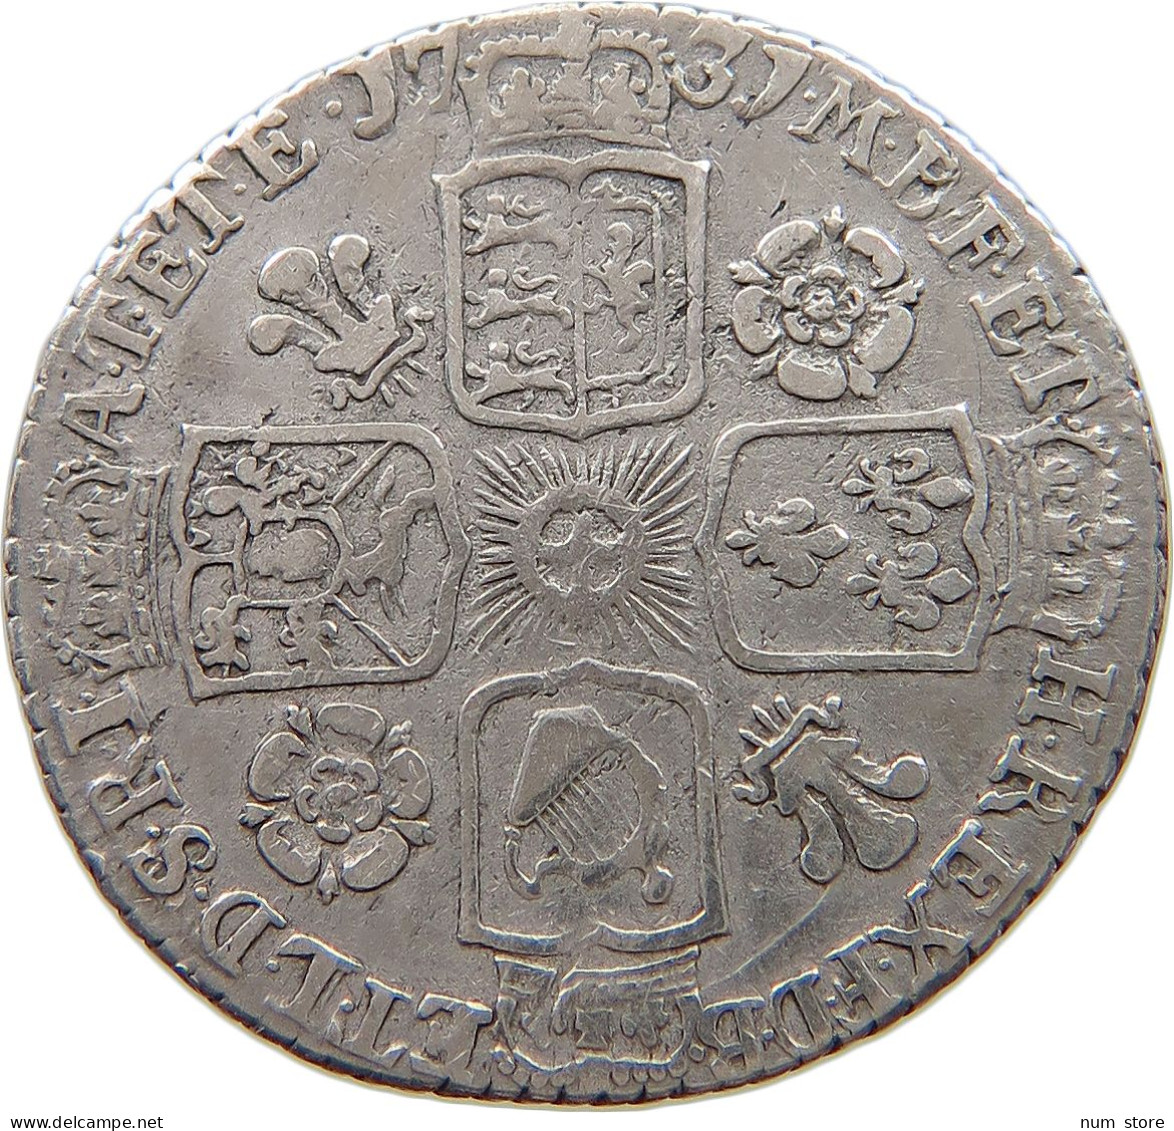 GREAT BRITAIN SIXPENCE 1731 George II. 1727-1760. #t115 0387 - G. 6 Pence